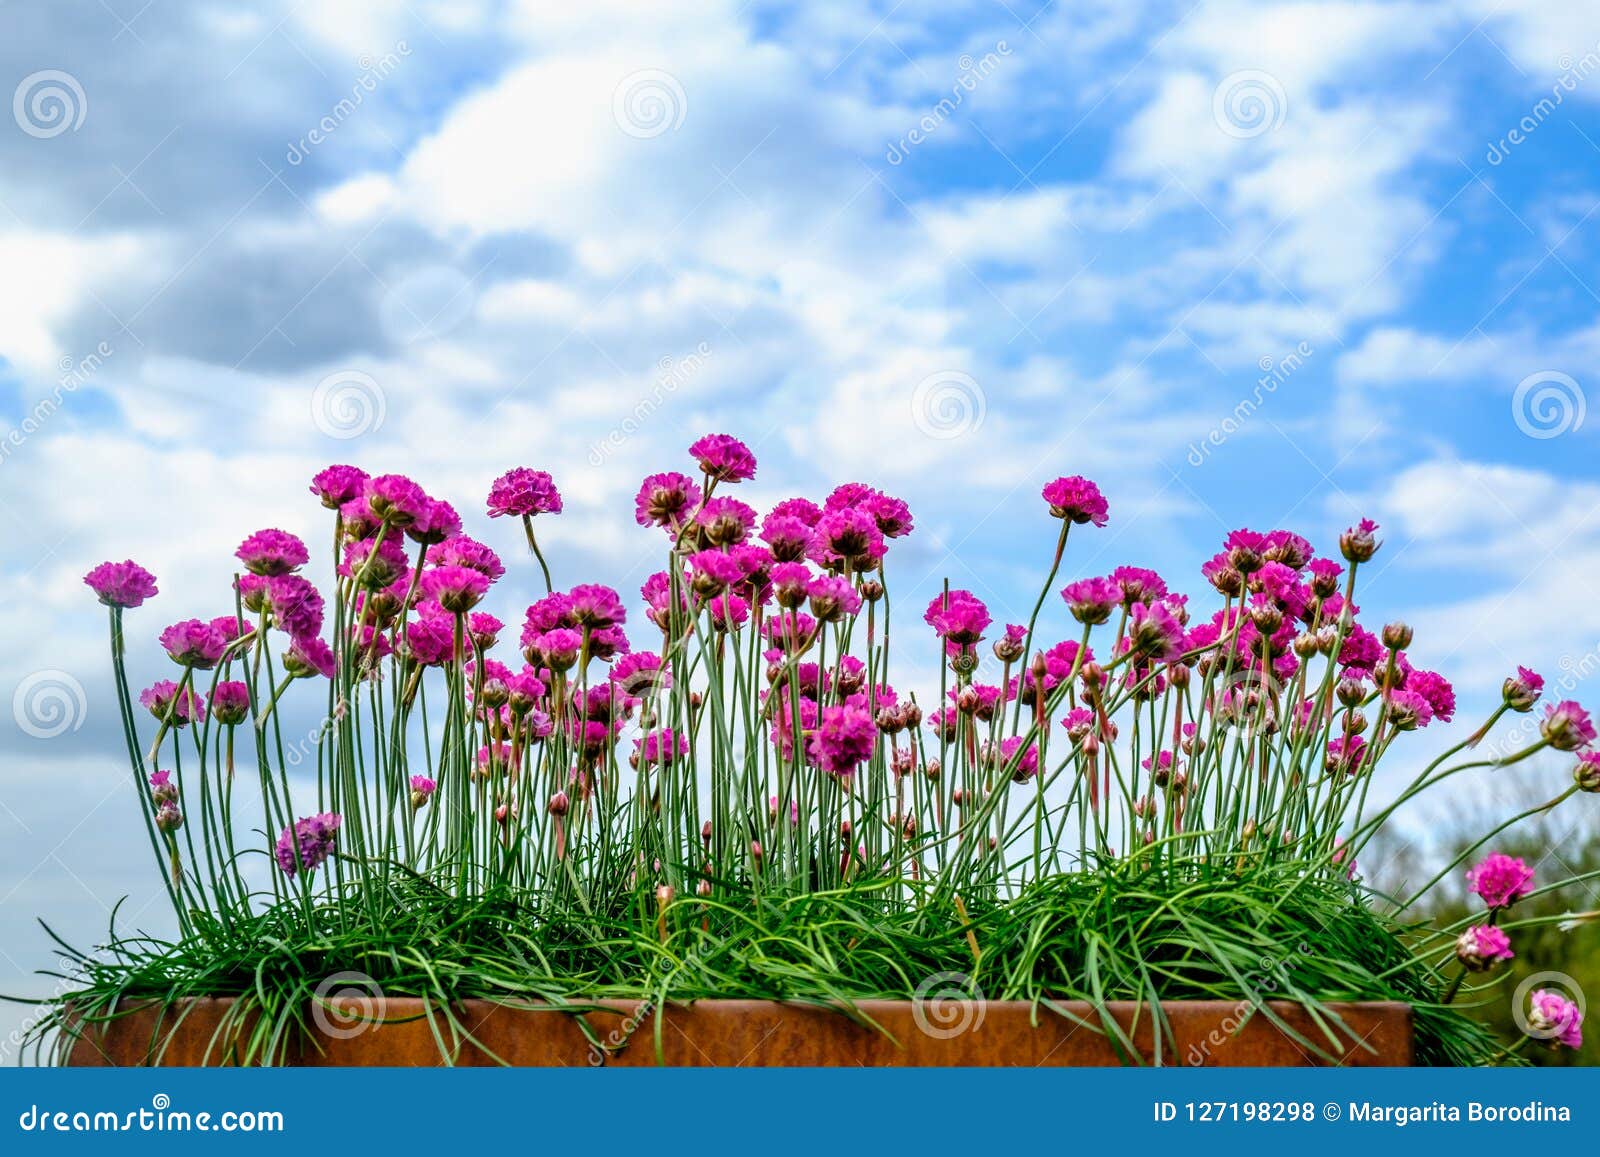 armeria maritima flowers. template for greeting cards